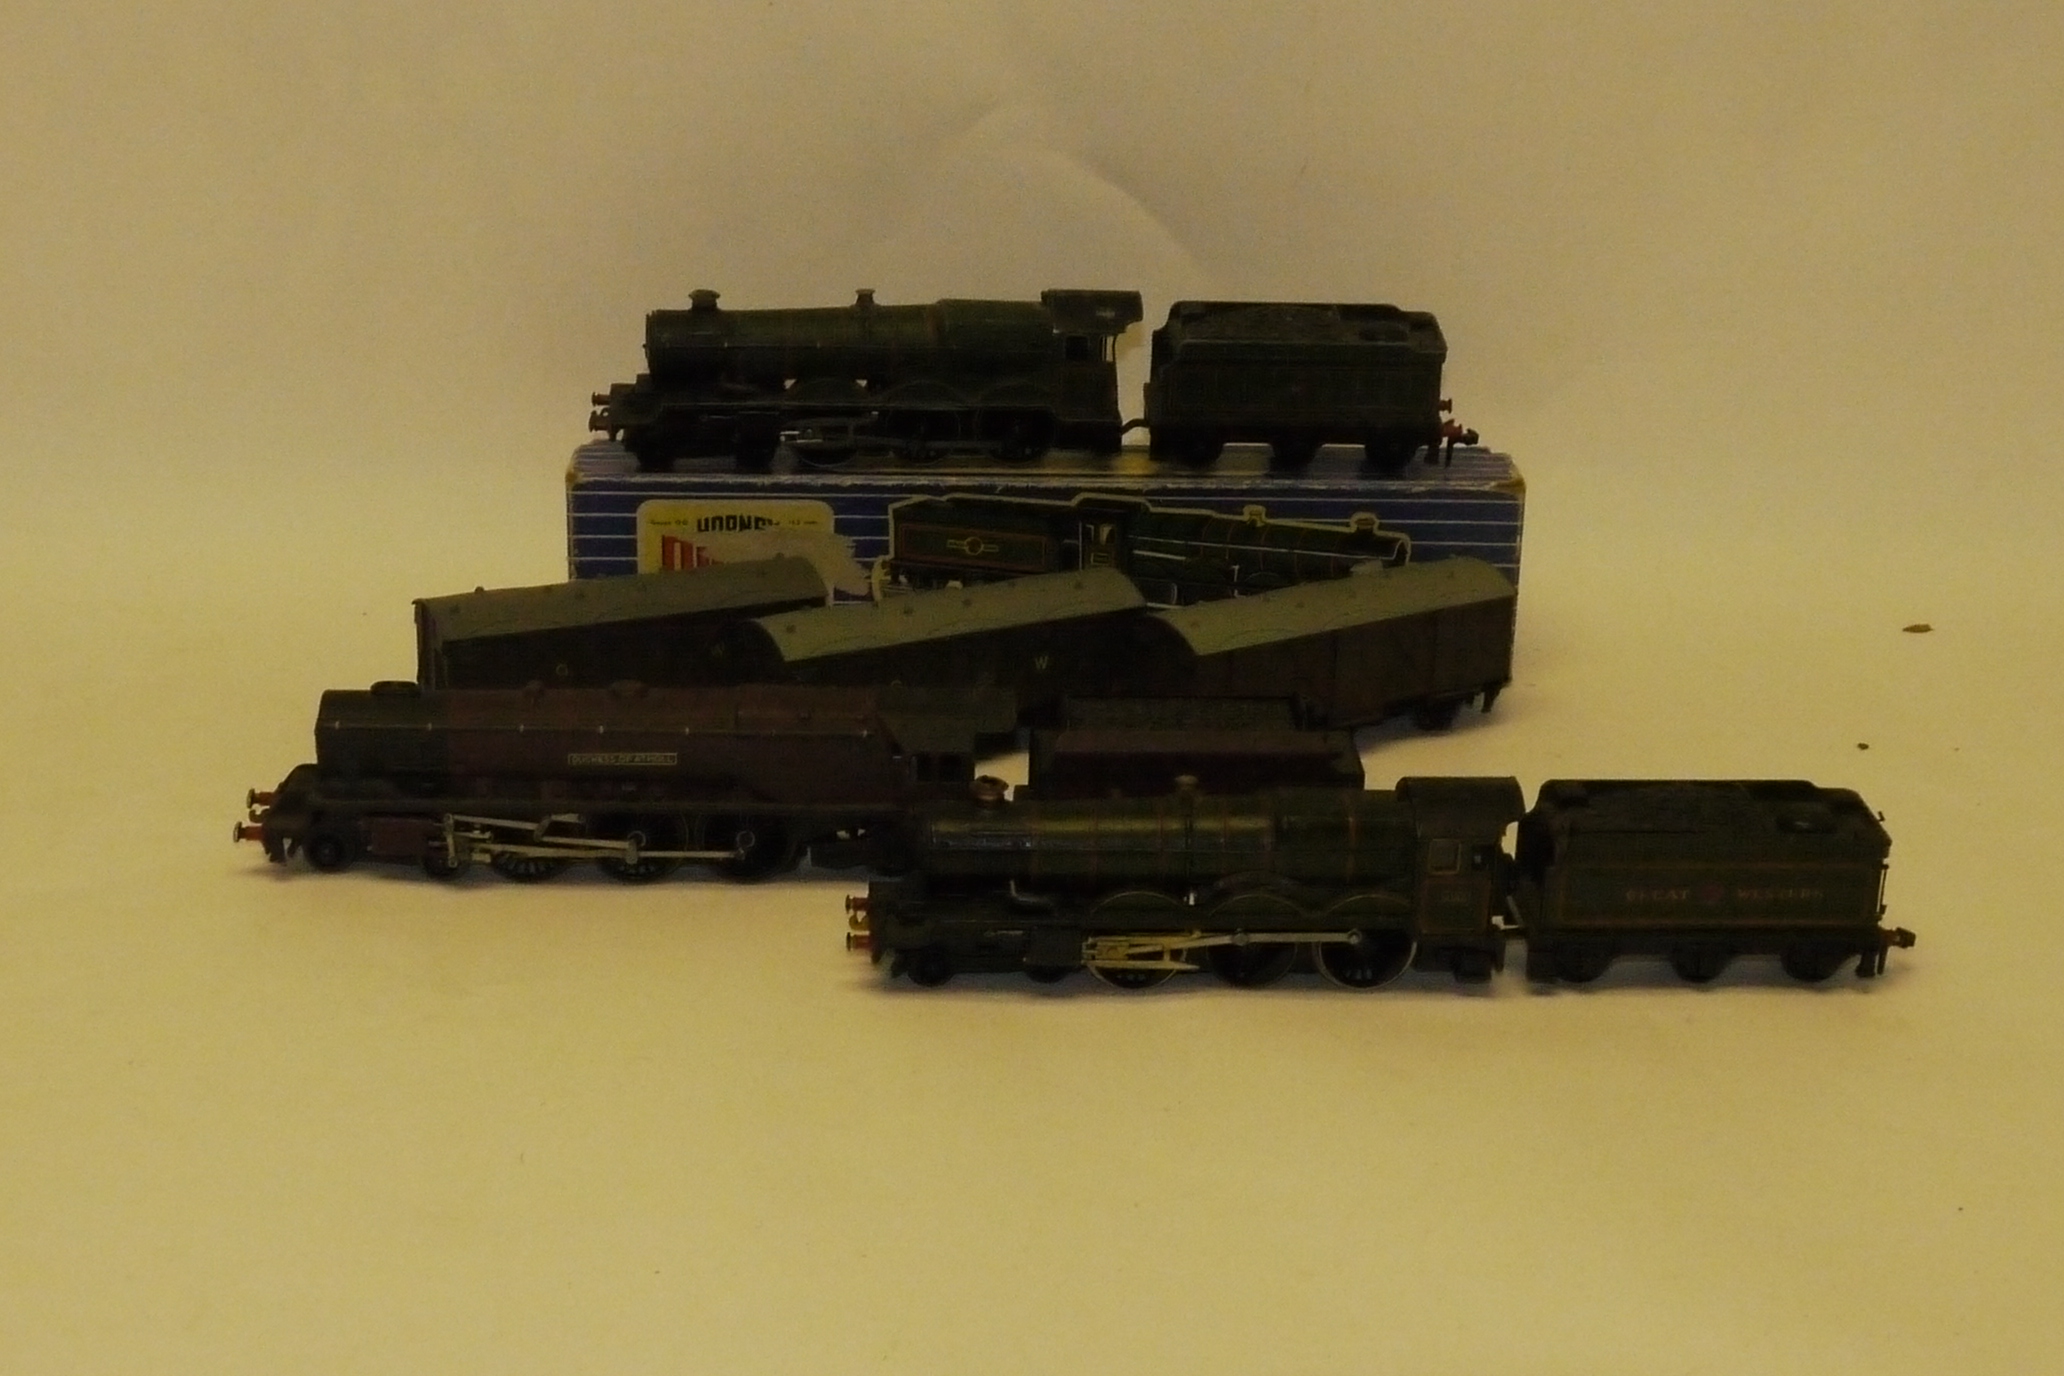 Modified Hornby-Dublo OO Gauge 2-rail Locomotives and Stock, including a re-wheeled 2-rail converted